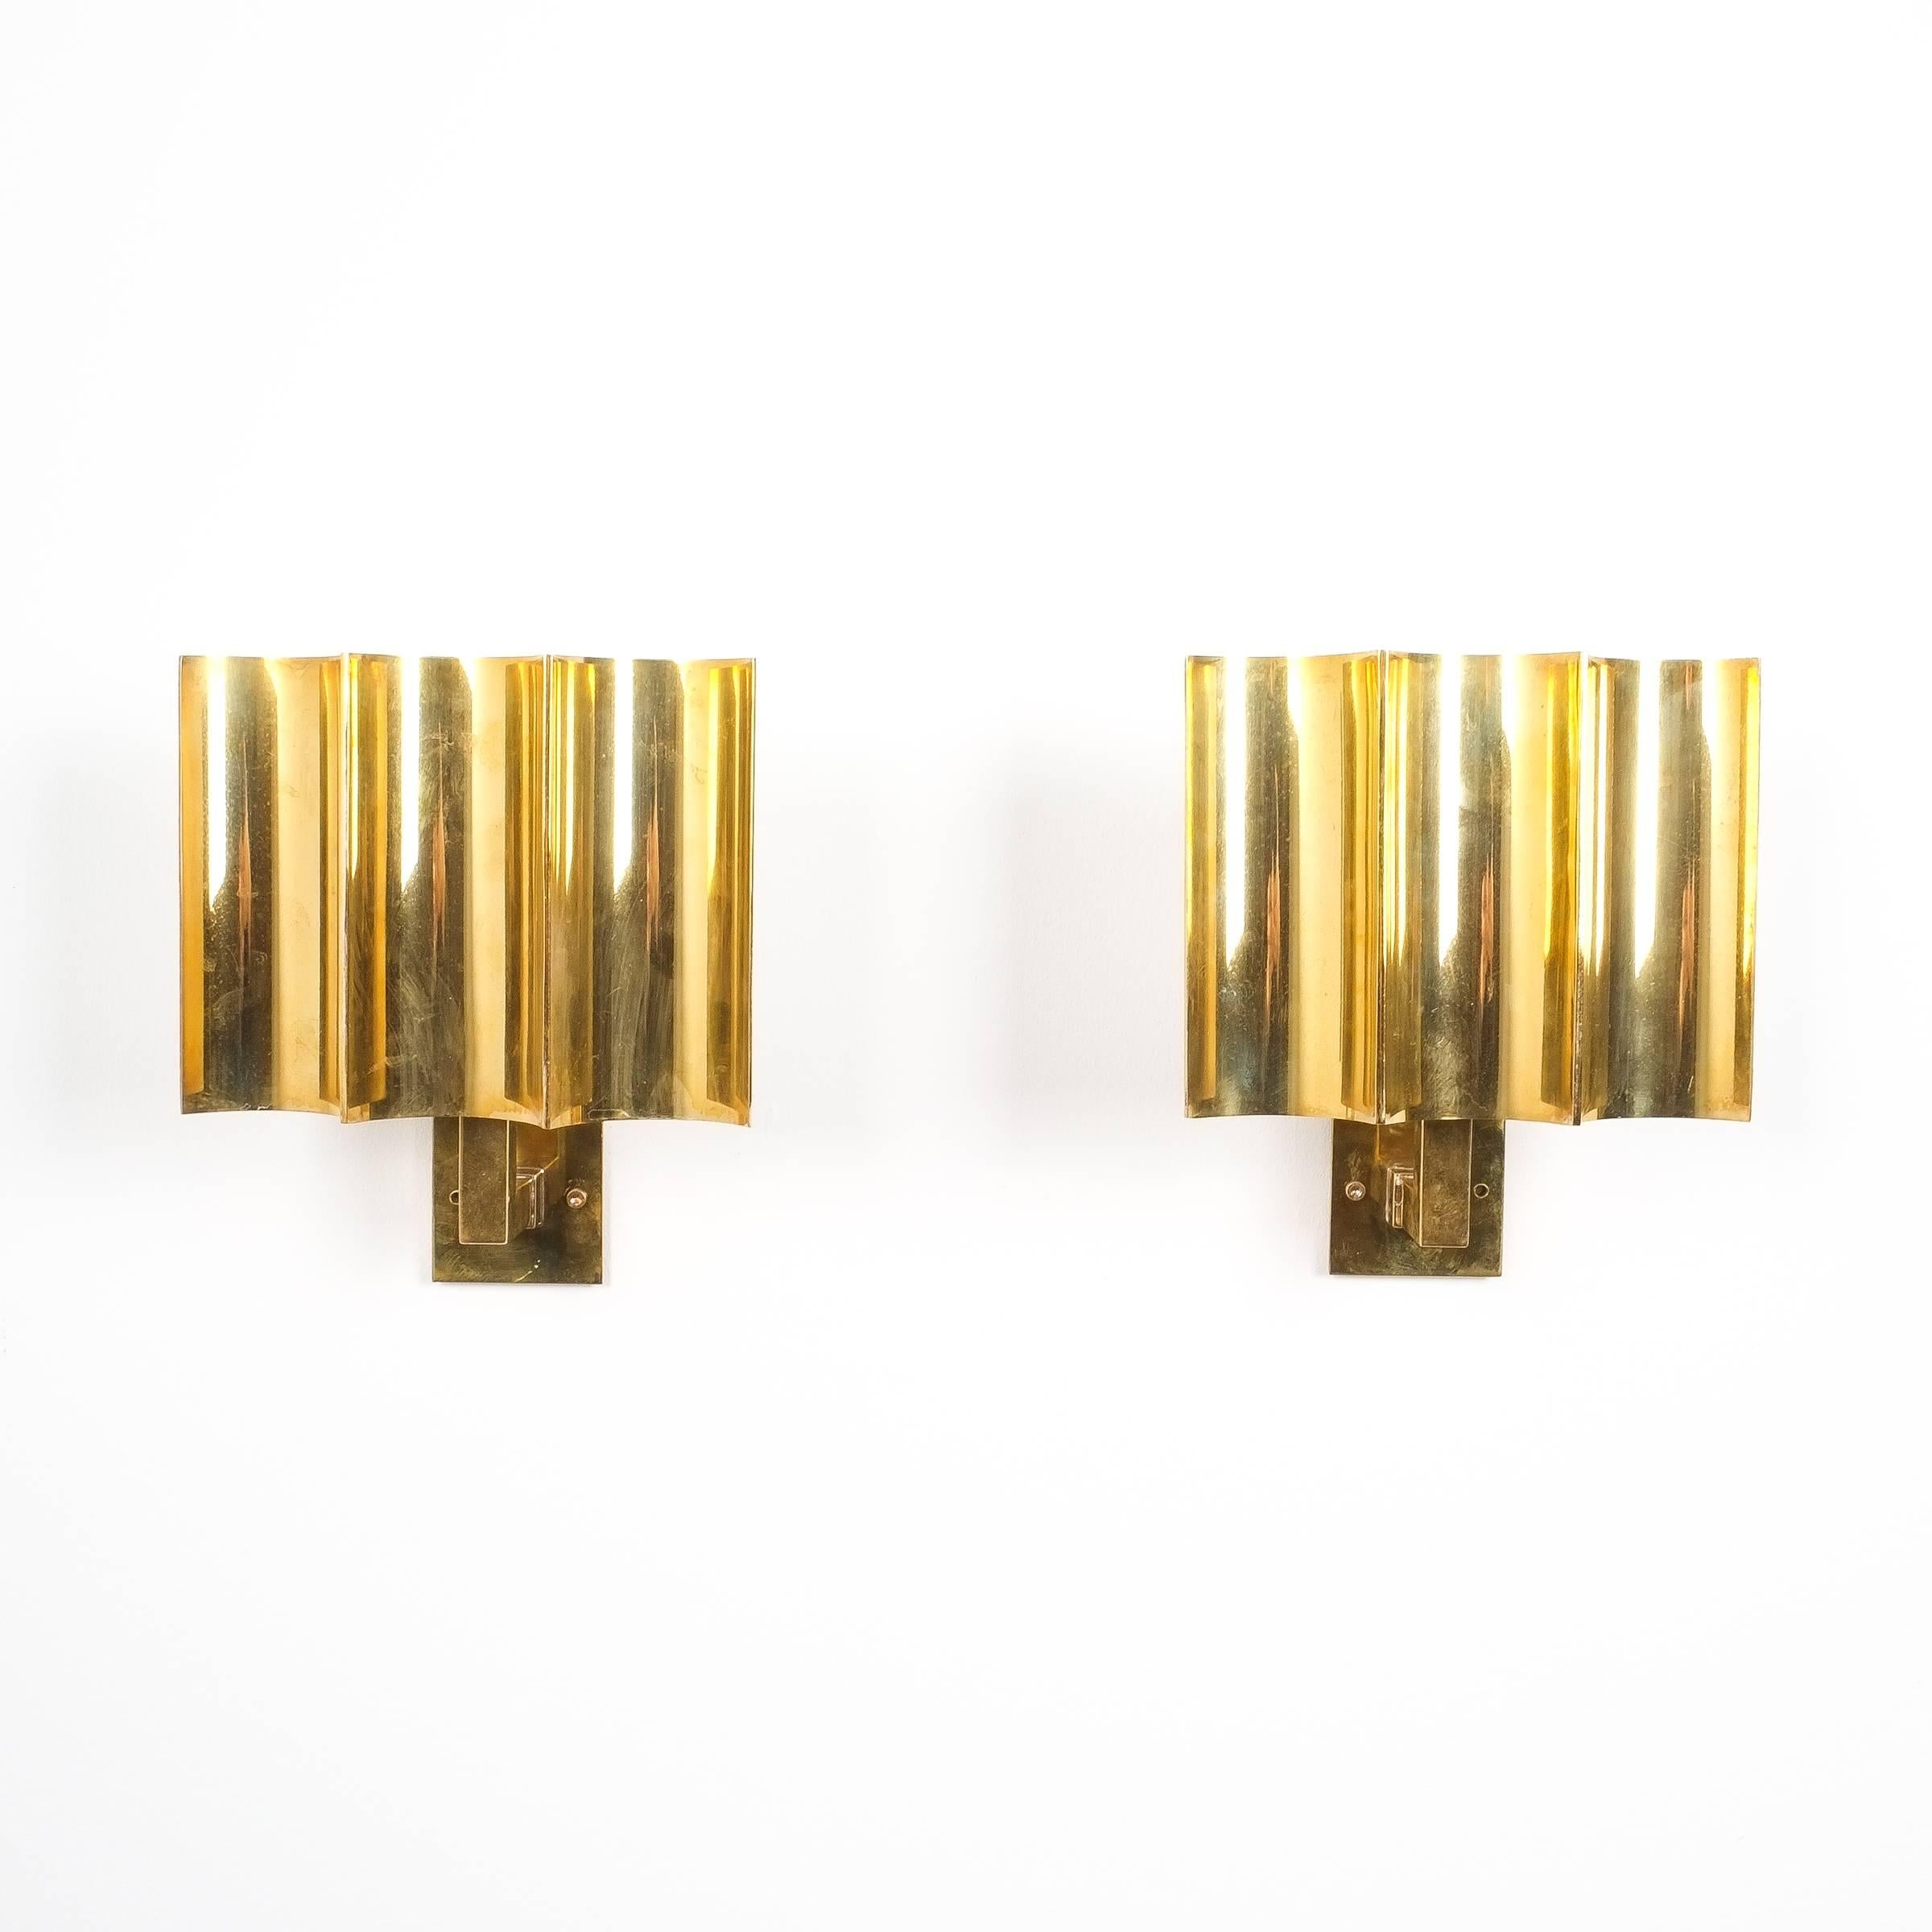 Polished Artisan Solid Brass Wall Lamps Sconces Art Deco Style, France, 1950 For Sale